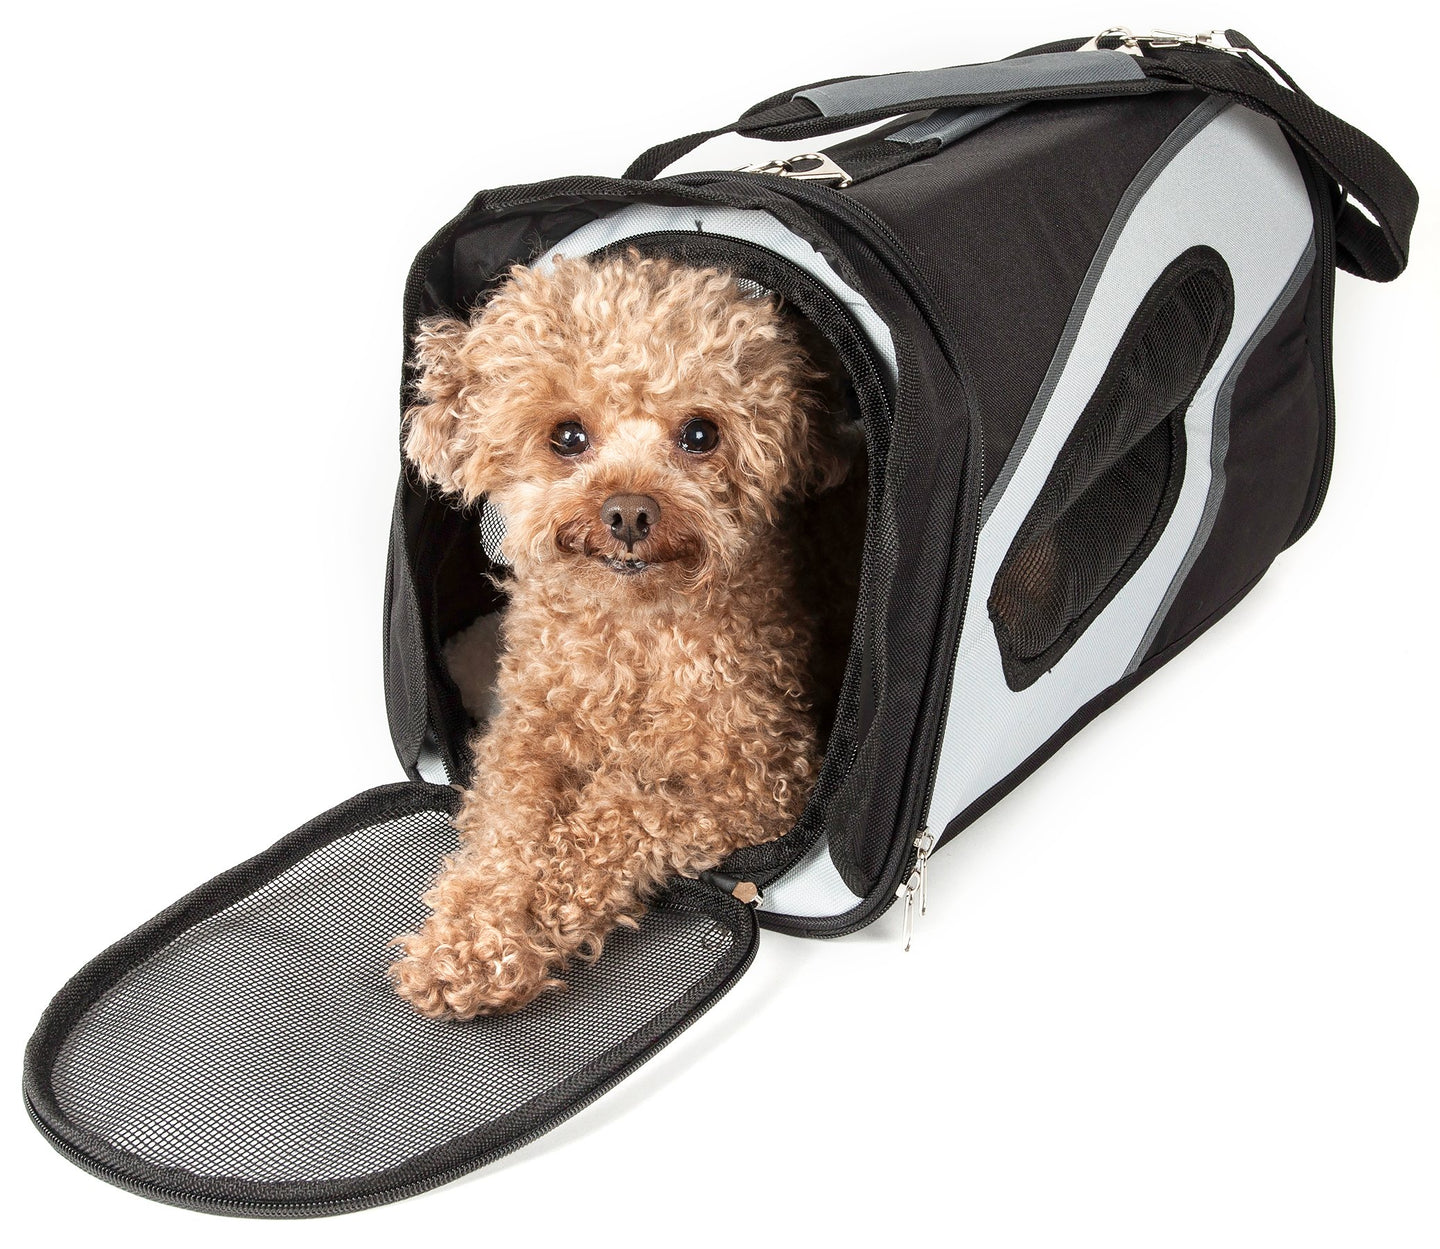 Pet Life Airline Approved Phenom-Air Collapsible Pet Carrier - Doggy Sauce